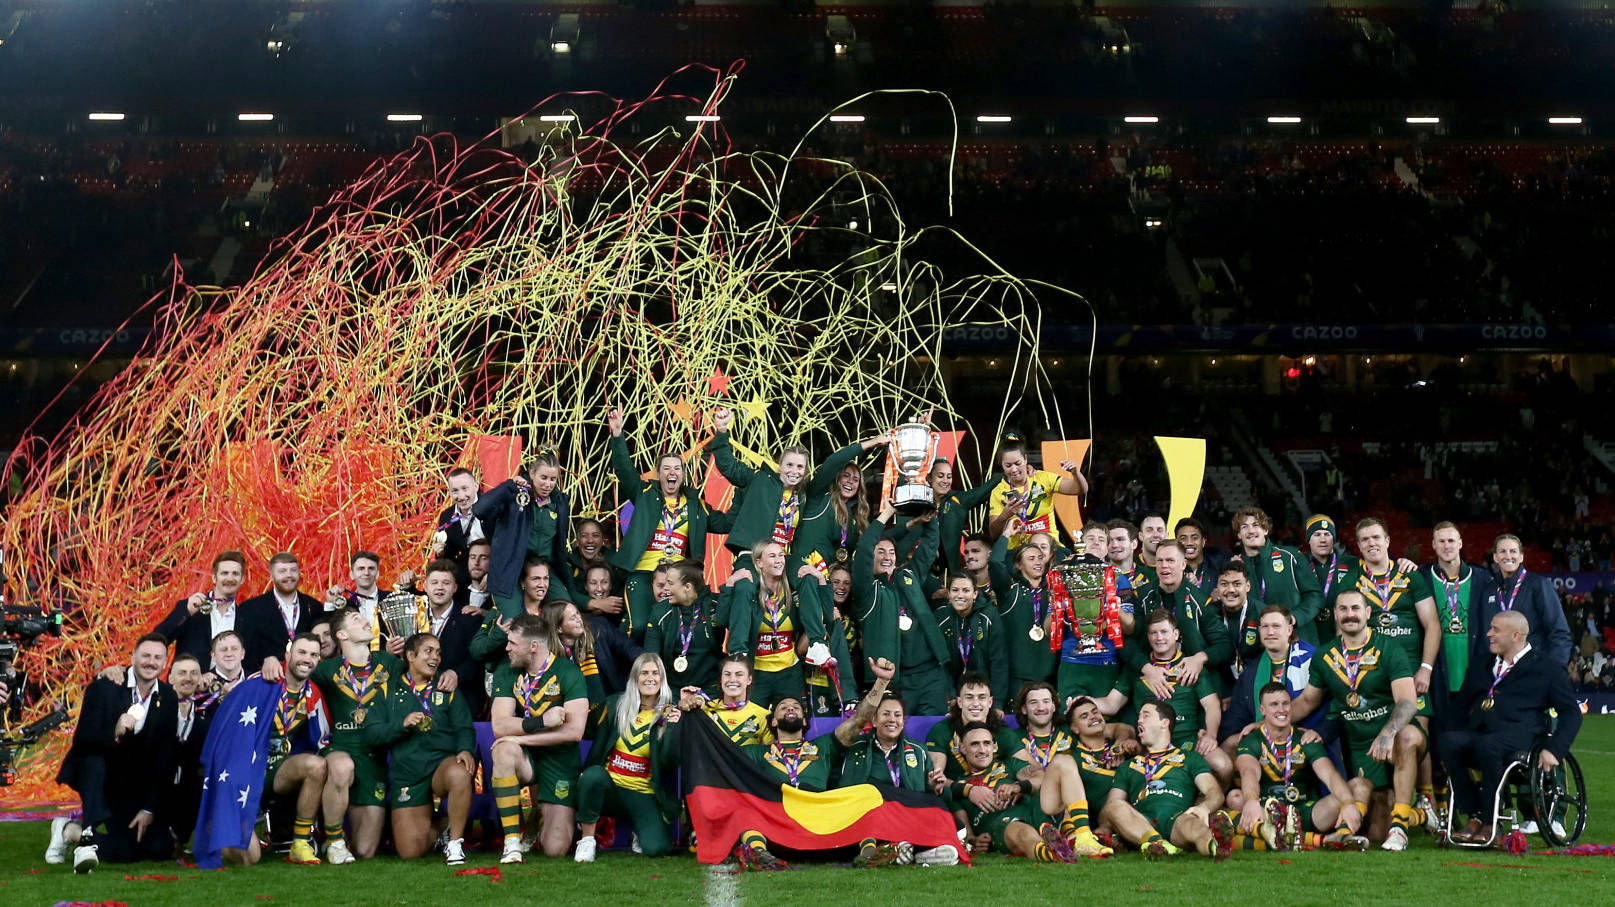 12-facts-about-rugby-league-world-cup